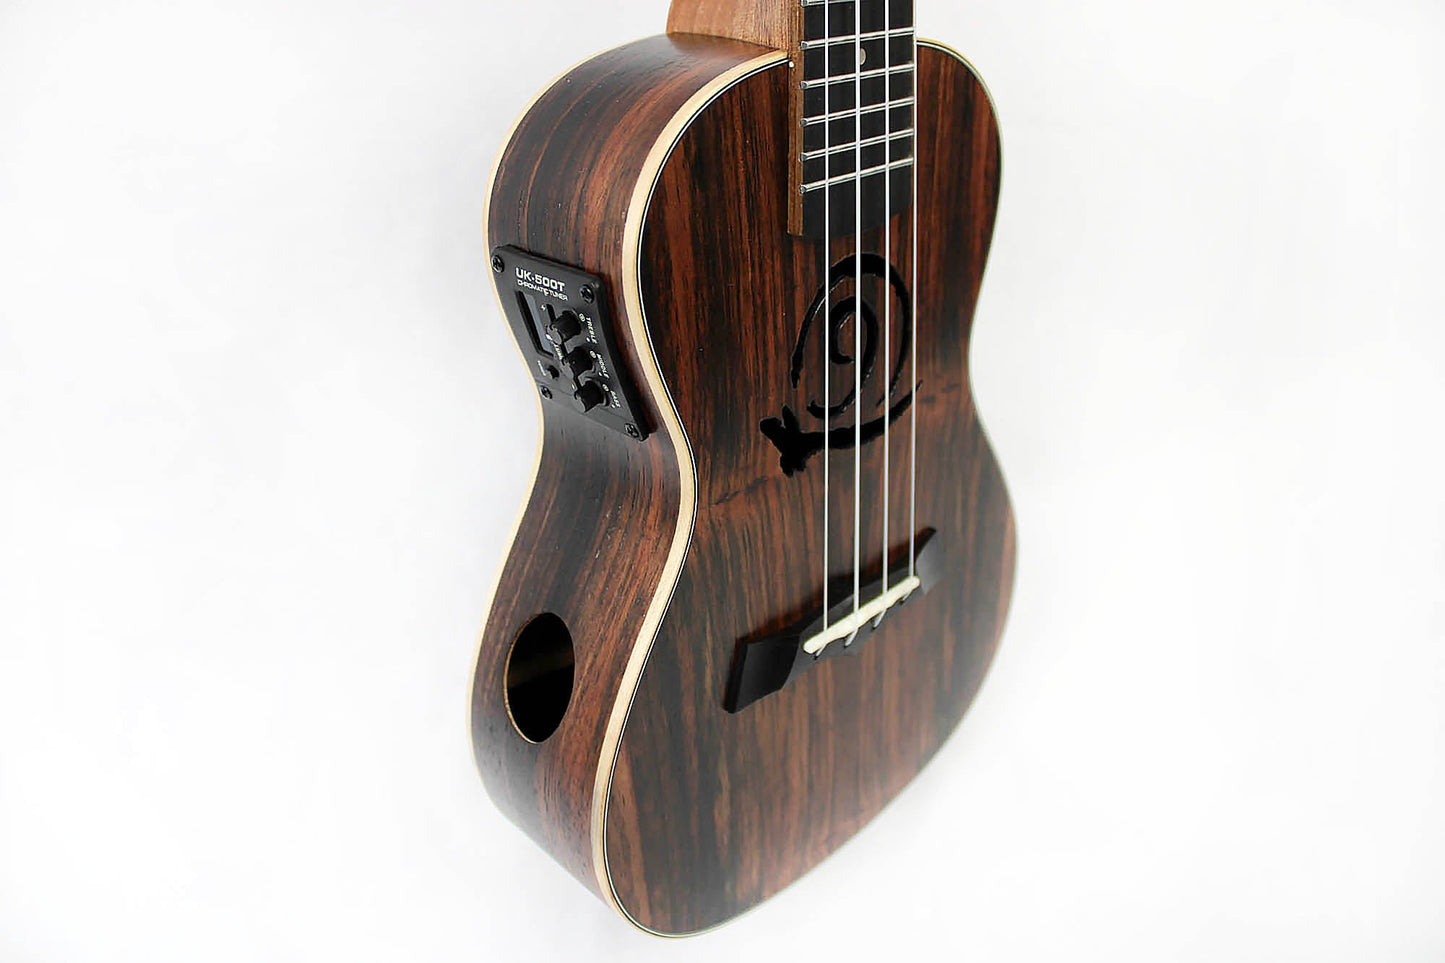 This is the front side view of the top and neck of a Snail SNAILEBUKEQ Ebony Ukulele Concert EQ.